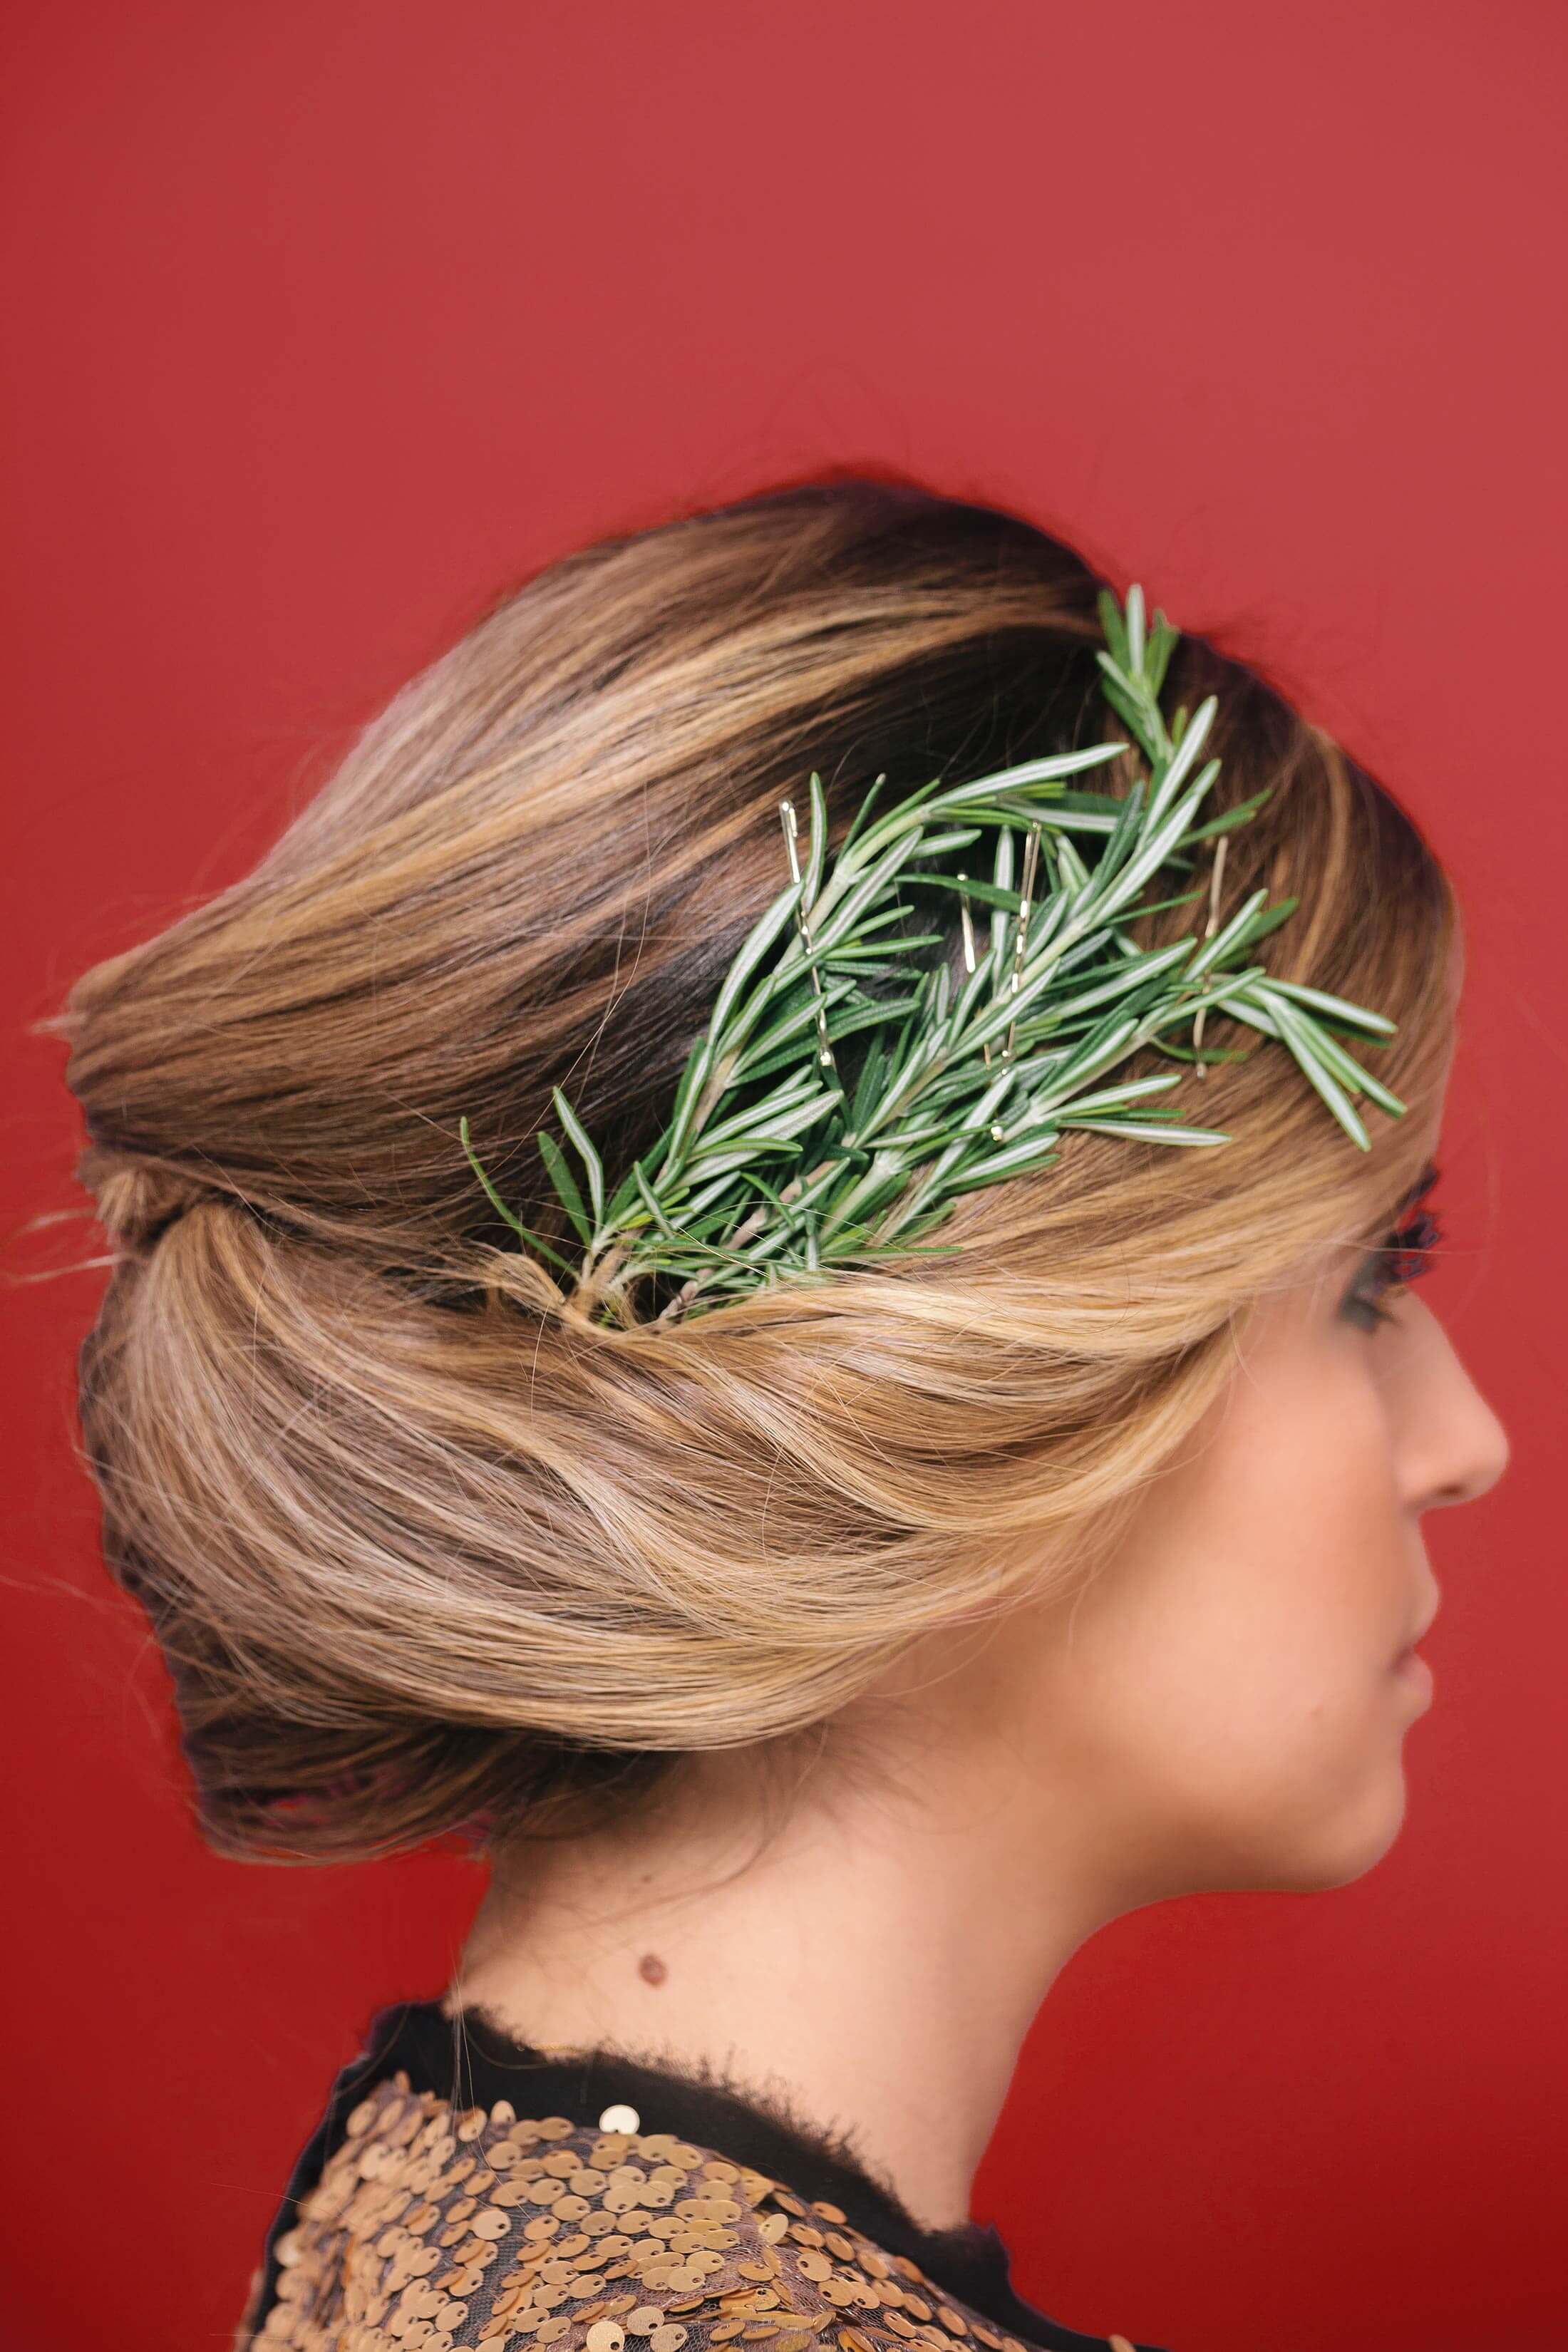 28 Stunning Christmas Hairstyles Don T Miss Out The Holiday Fun